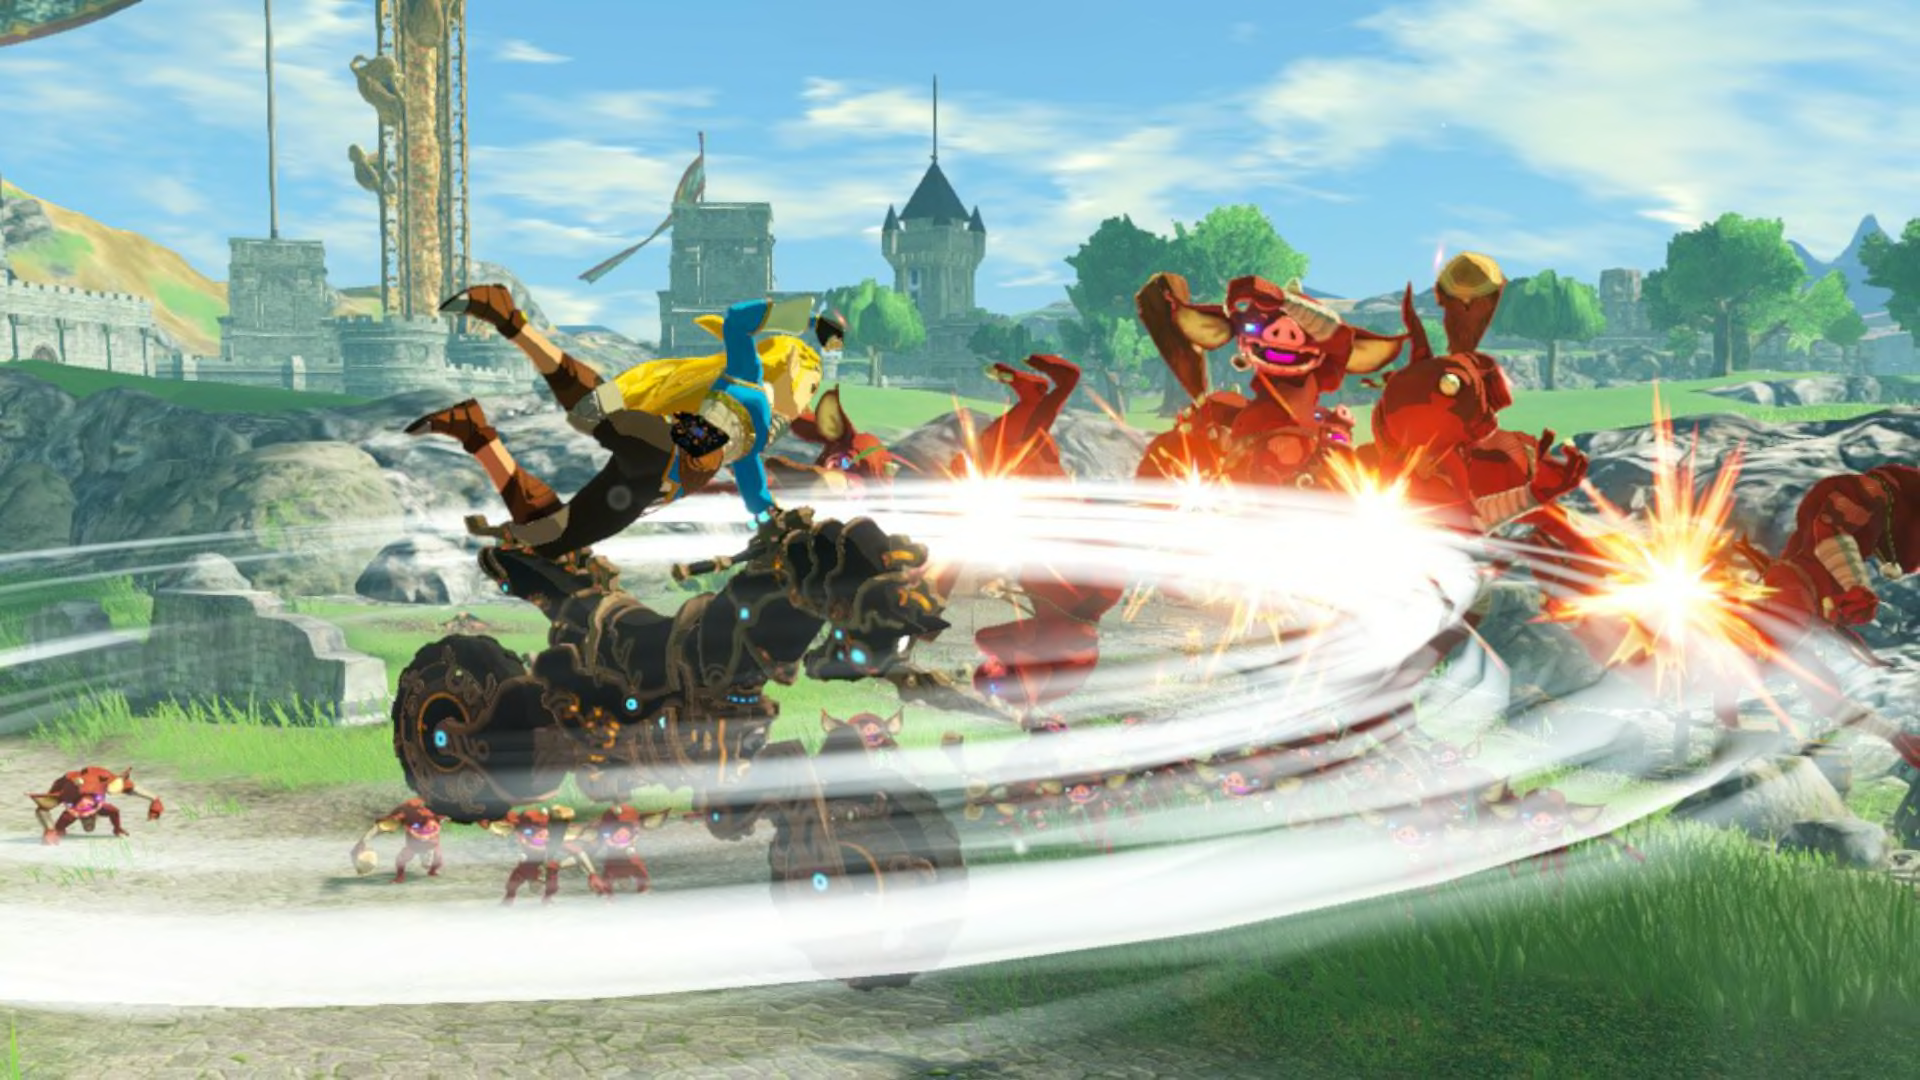 New Screenshots Of Hyrule Warriors Shows New Characters – The Arcade